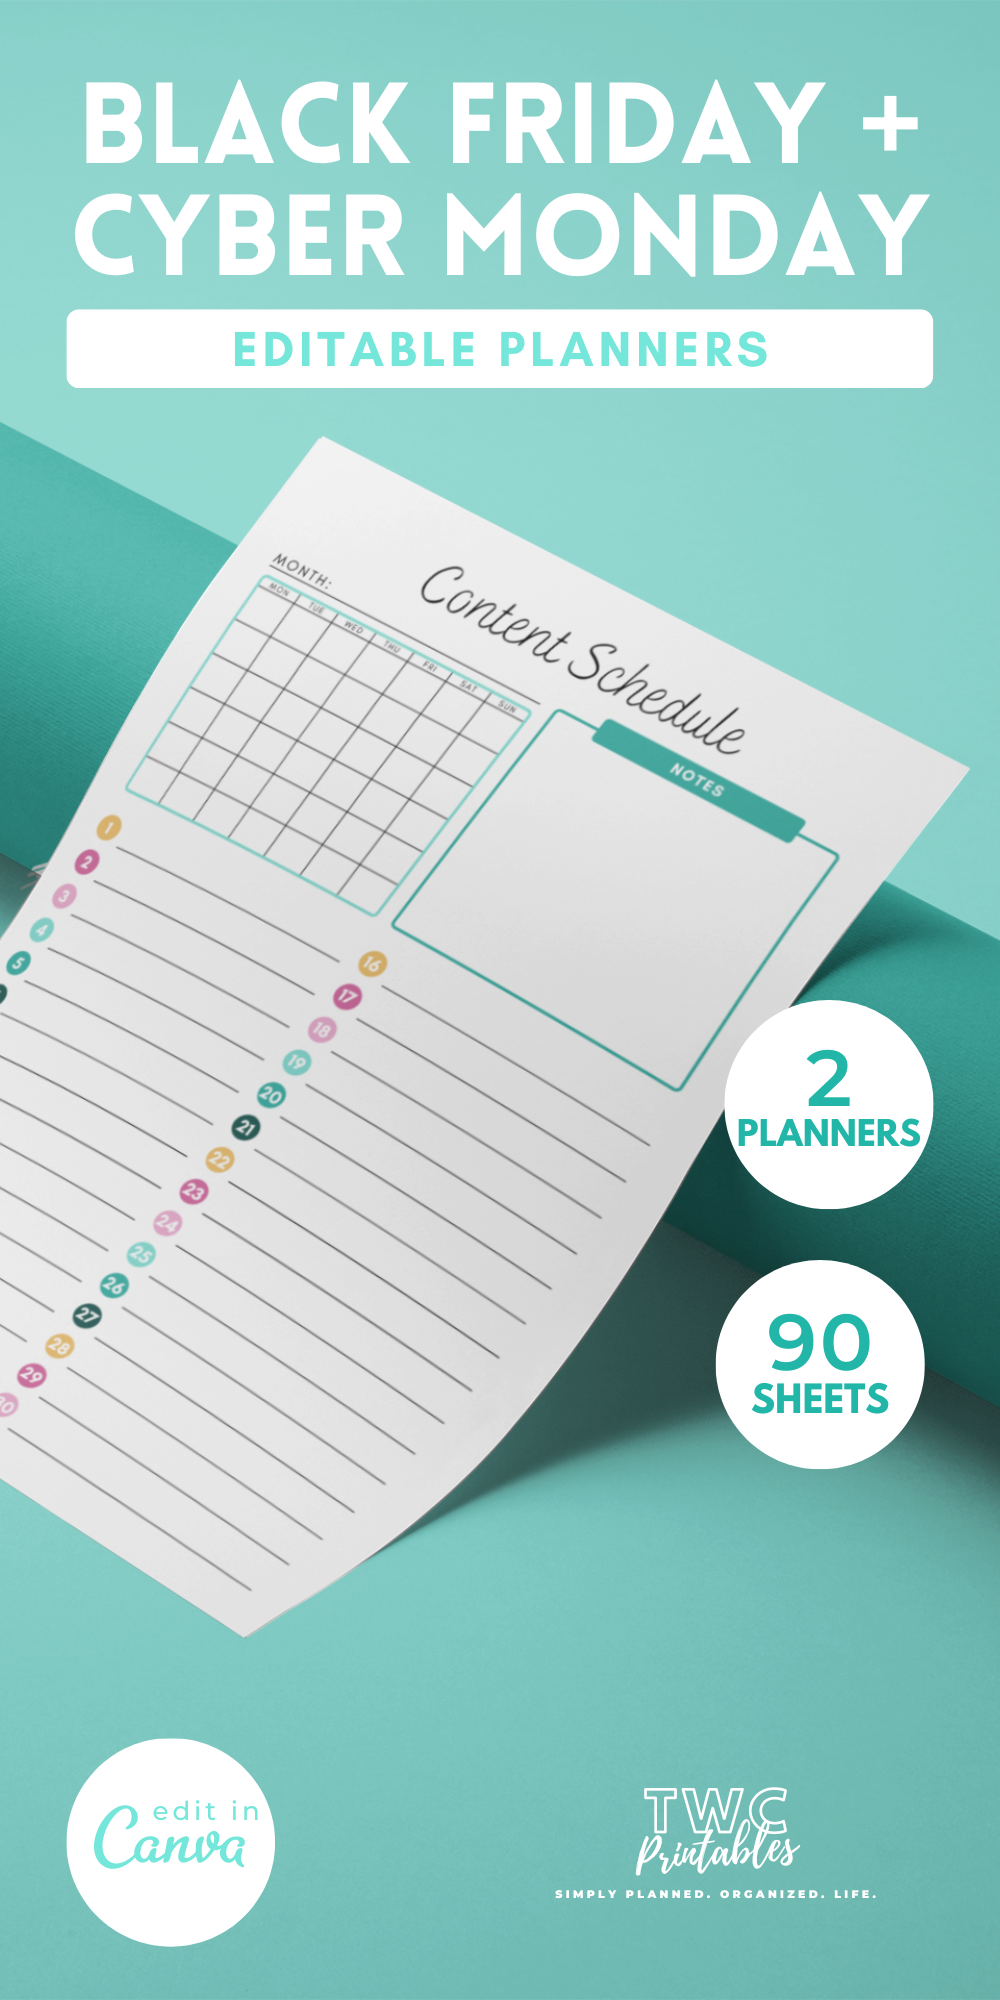 Content Schedule - Black Friday Sales Planner Canva Templates